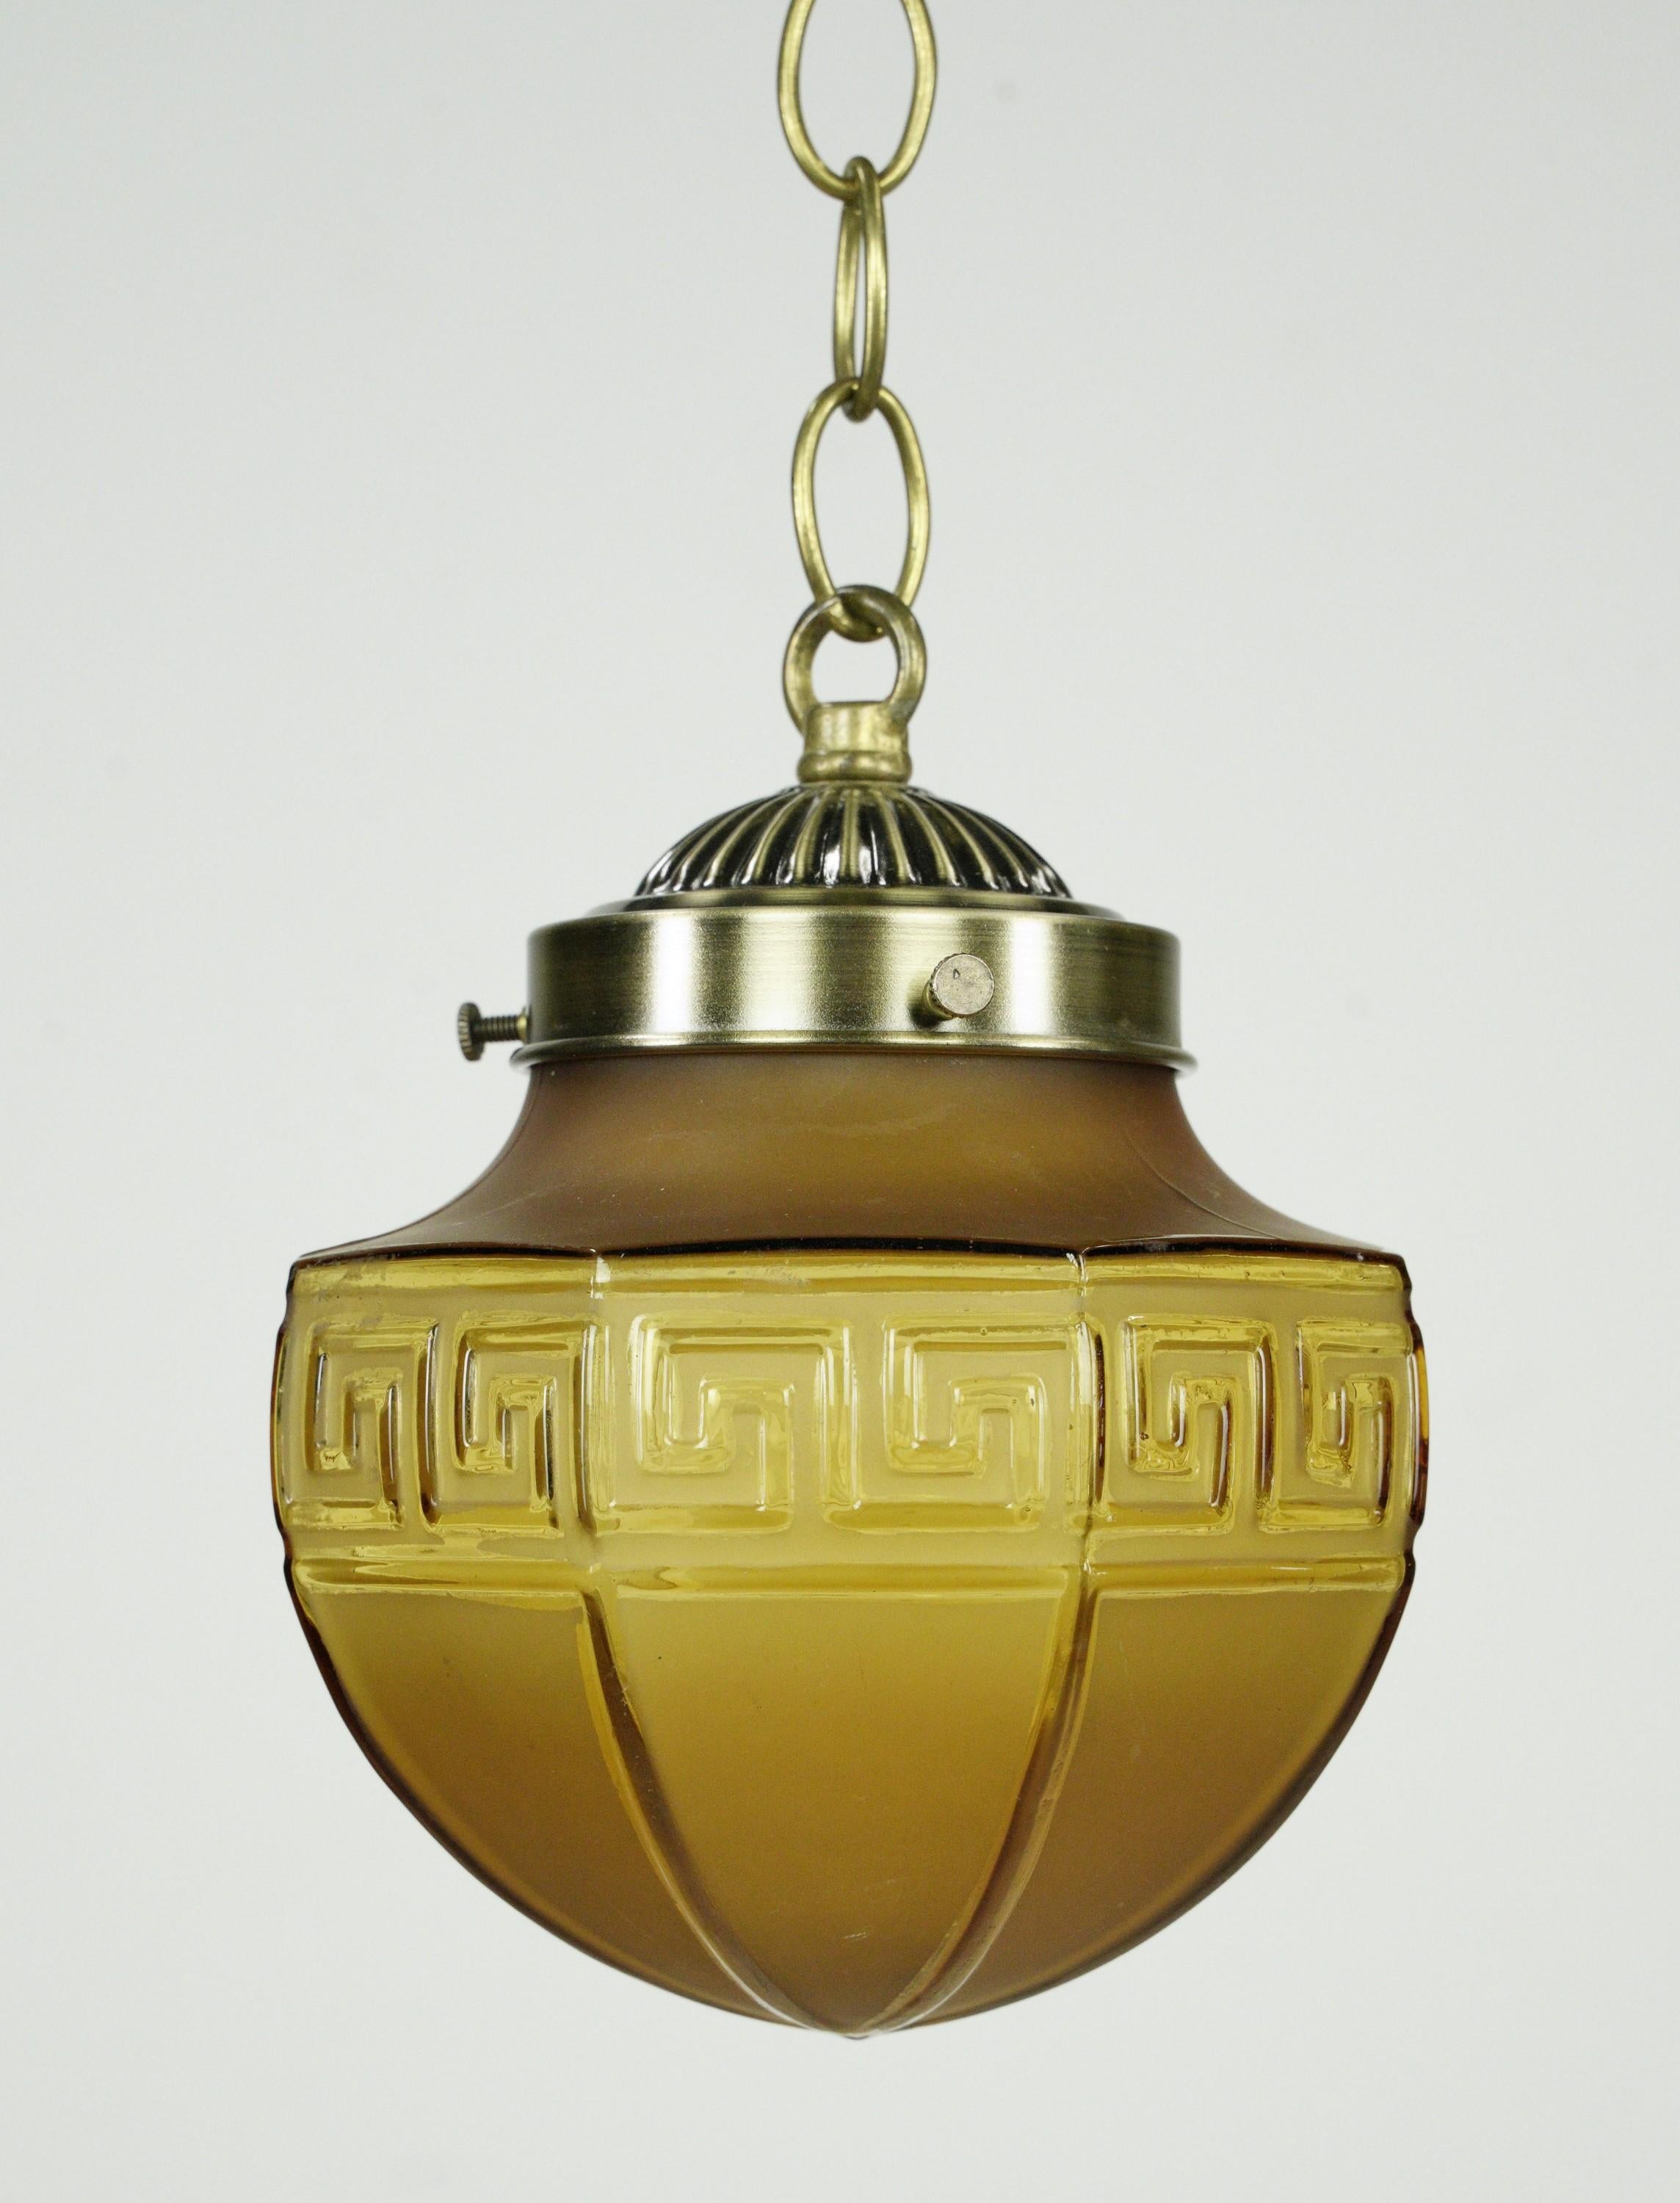 Amber colored glass globe pendant light with a Greek key design and brass plated steel hardware. This requires one standard medium base bulb. The price includes restoration of cleaning and rewiring. One available. Cleaned and restored. Please note,